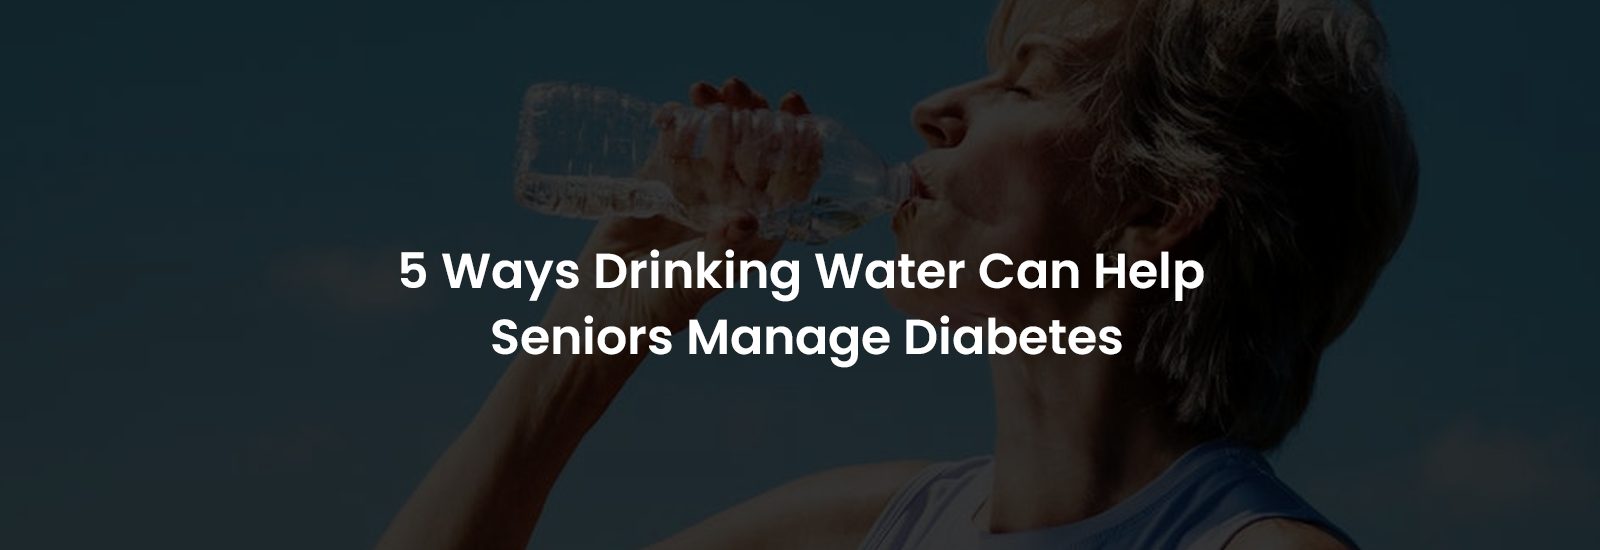 5 Ways in Which Drinking Water Can Help Seniors Manage Diabetes | Banner Image